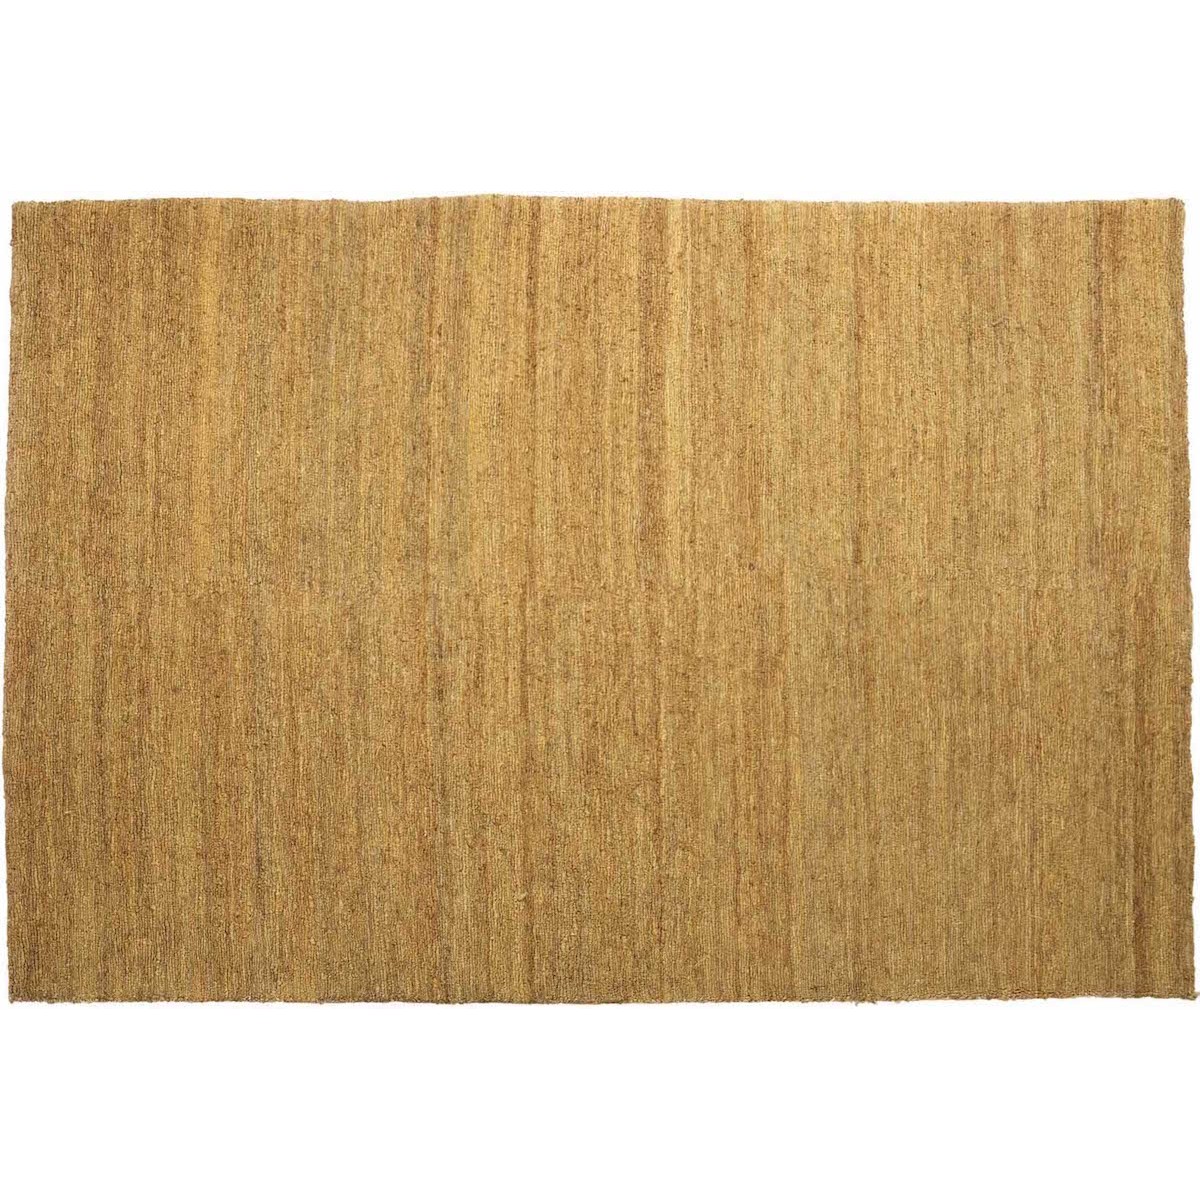 300x400cm - ocre - tapis Earth